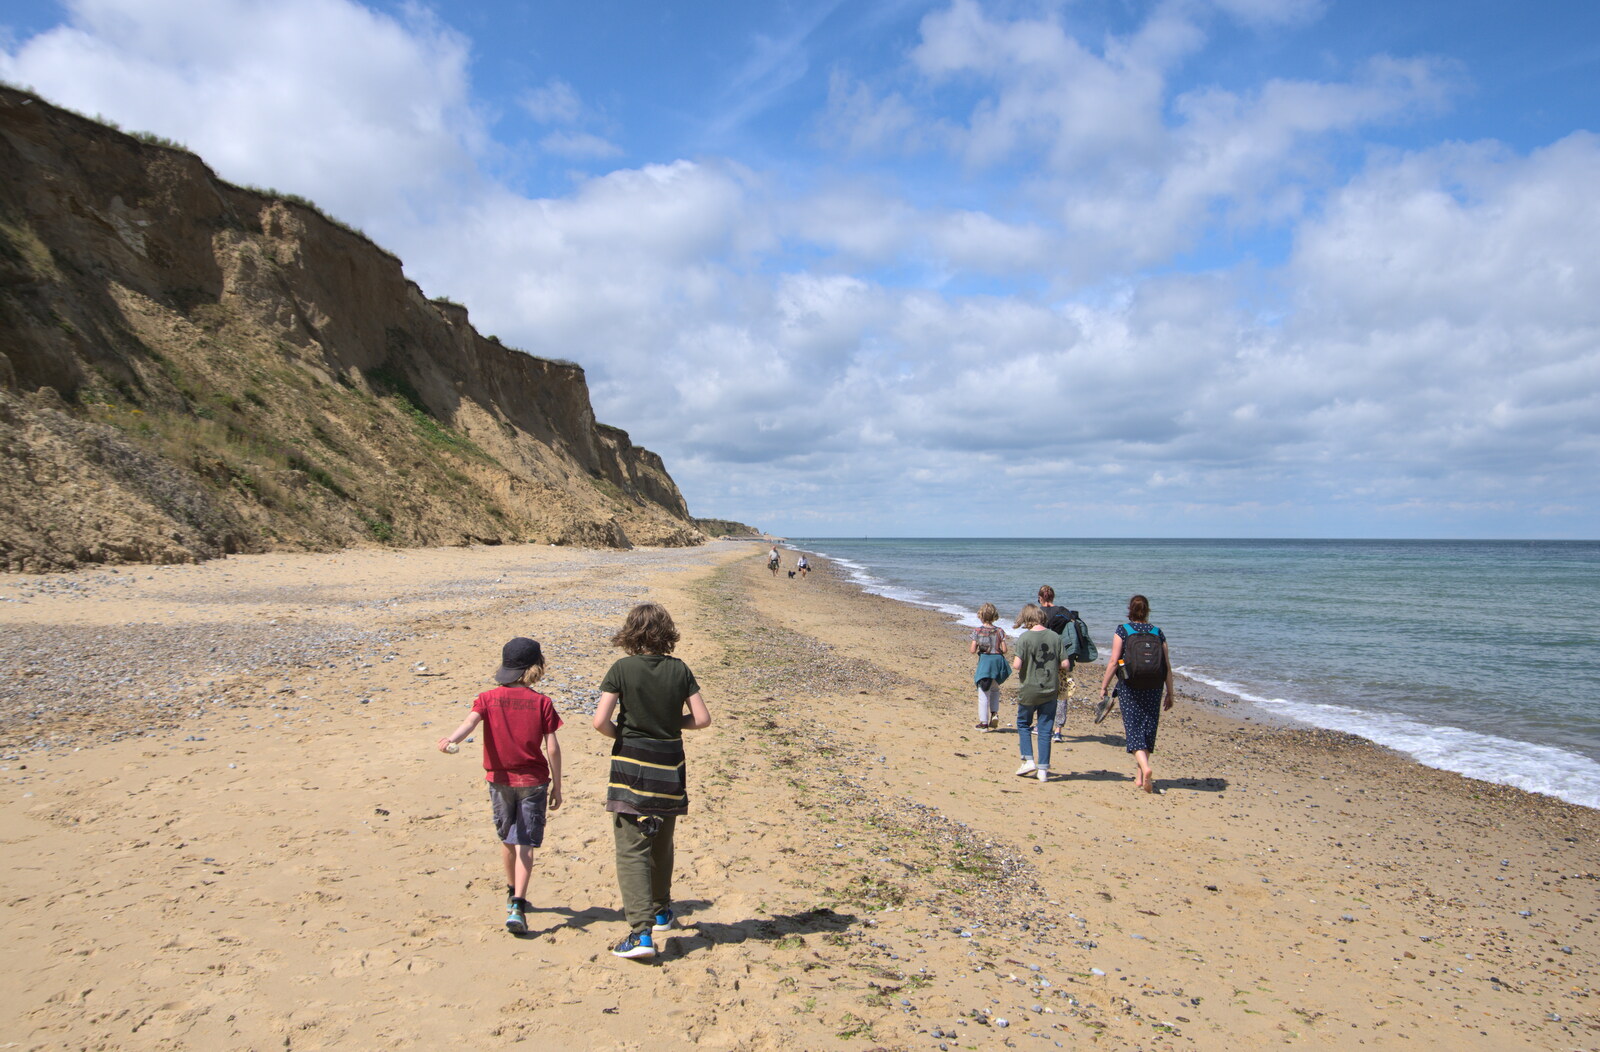 On the beach from Camping on the Coast, East Runton, North Norfolk - 25th July 2020